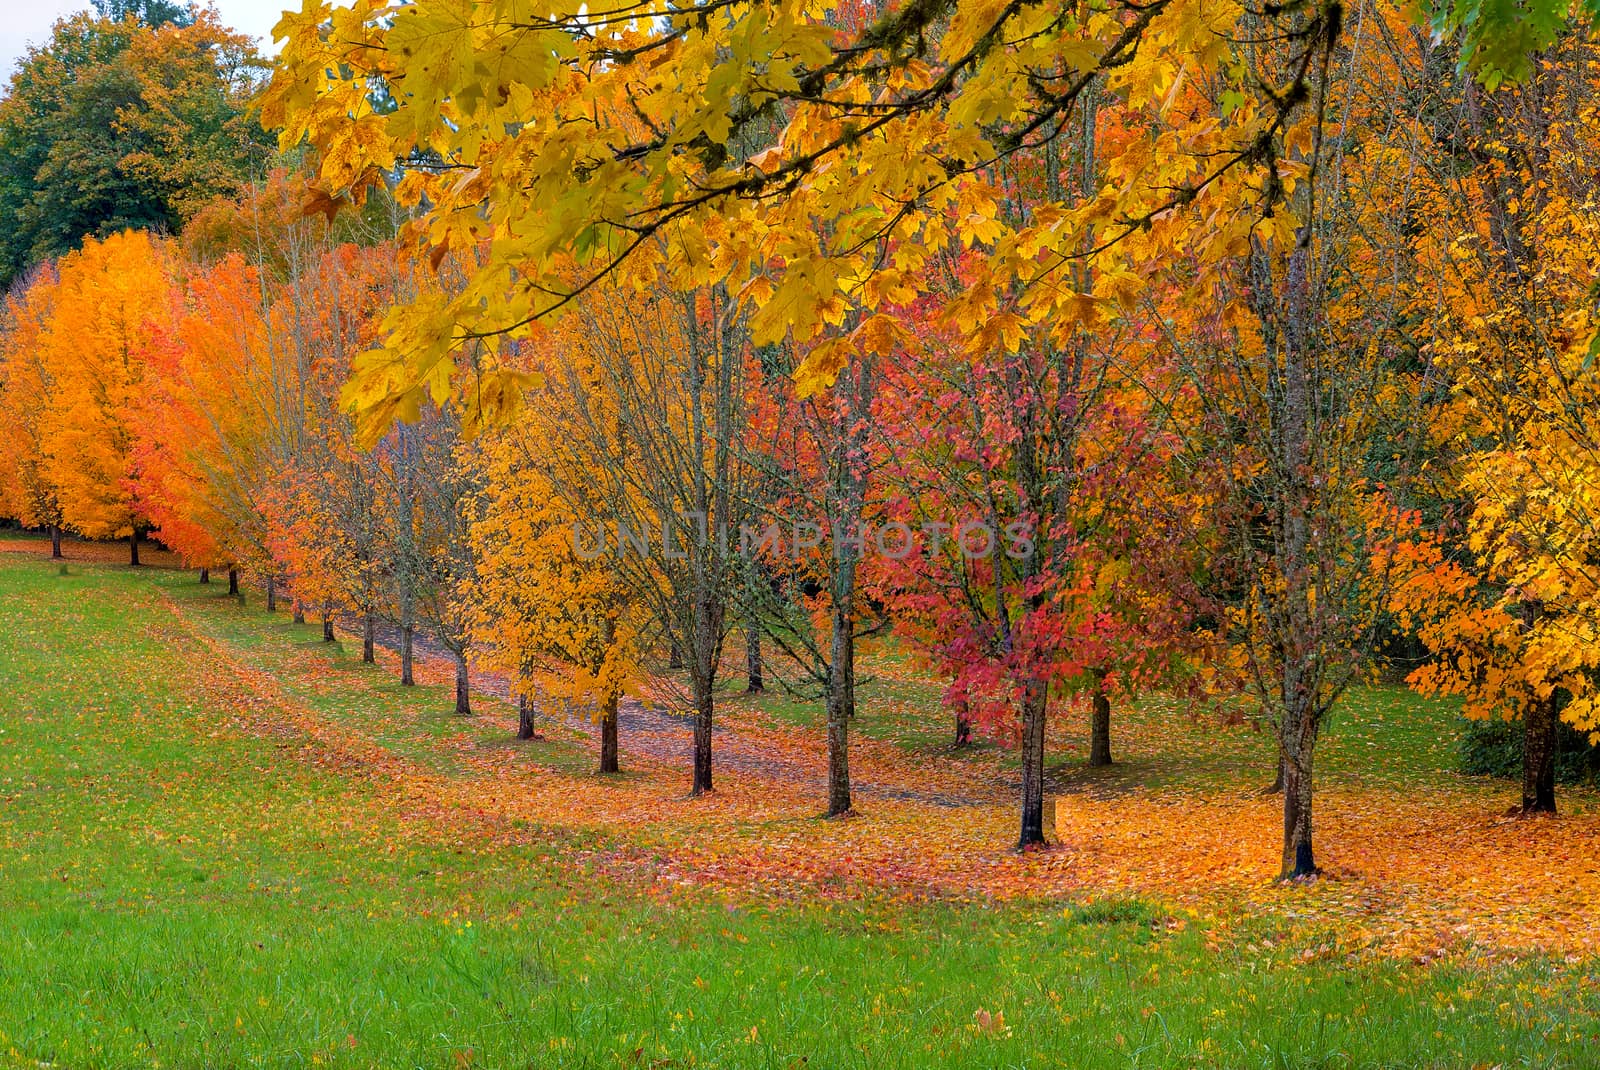 Tree Lined Path with Fall Foliage by jpldesigns